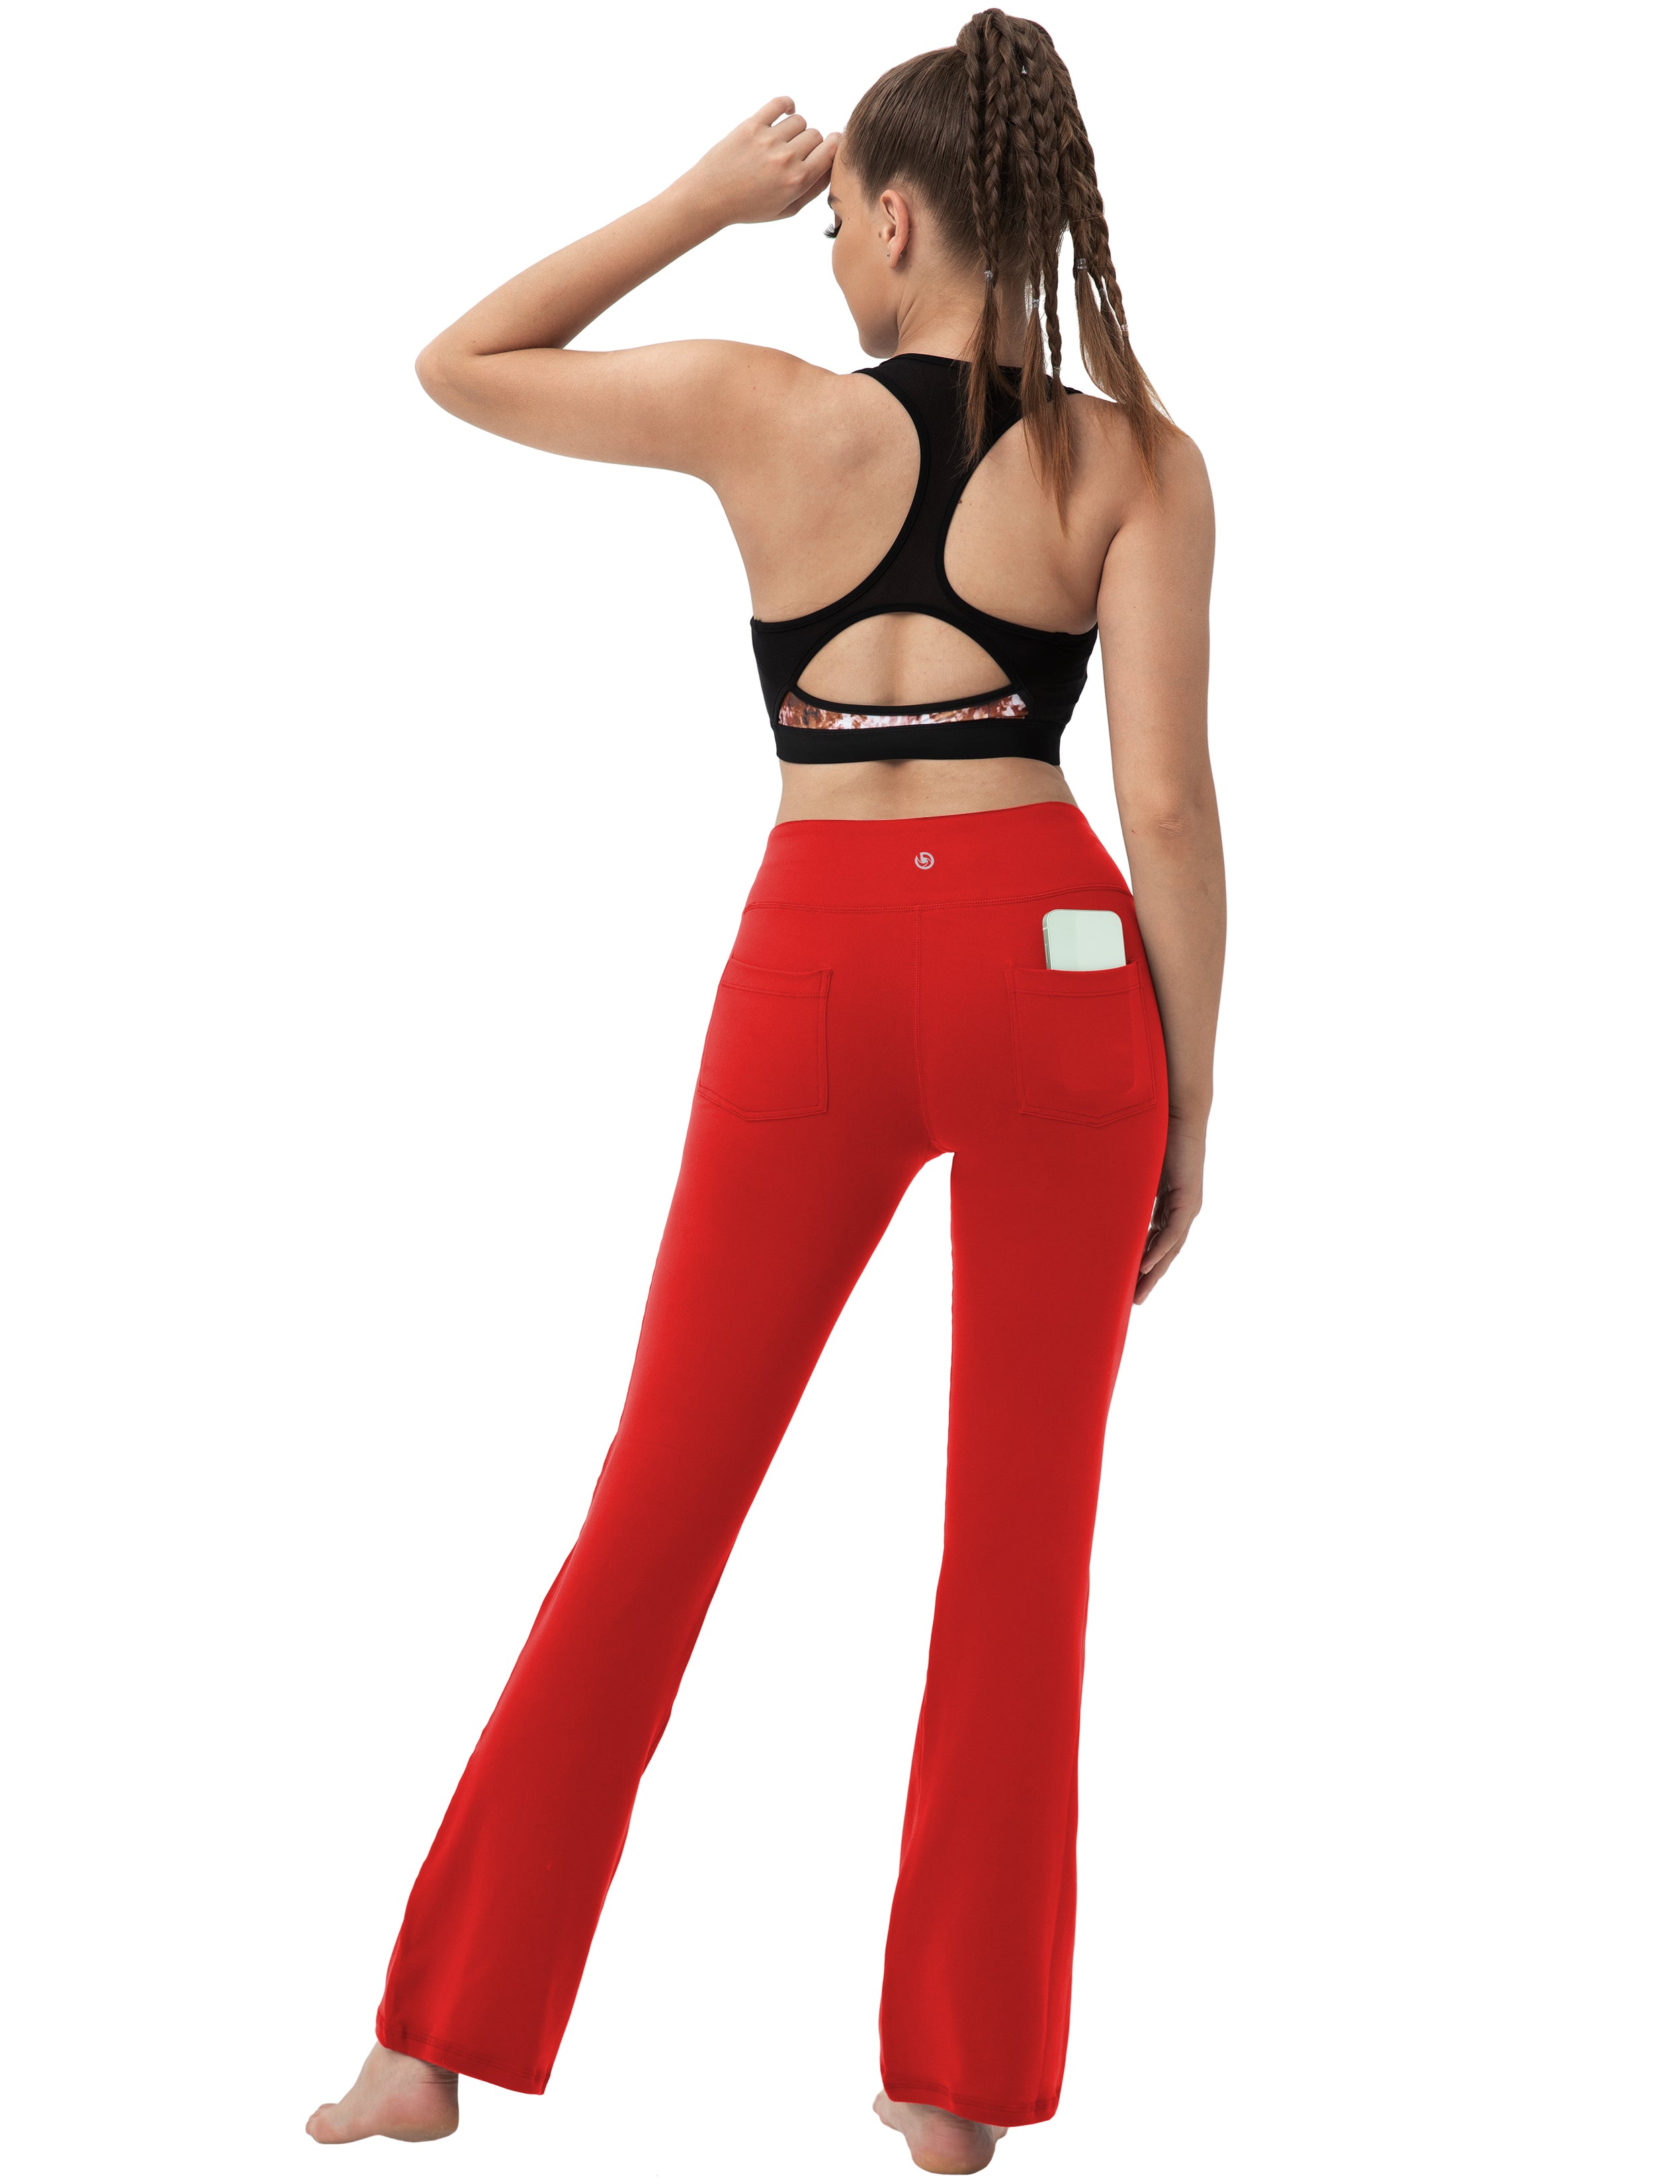 Back Pockets Bootcut Leggings scarlet 87%Nylon/13%Spandex Fabric doesn't attract lint easily 4-way stretch No see-through Moisture-wicking Inner pocket Four lengths